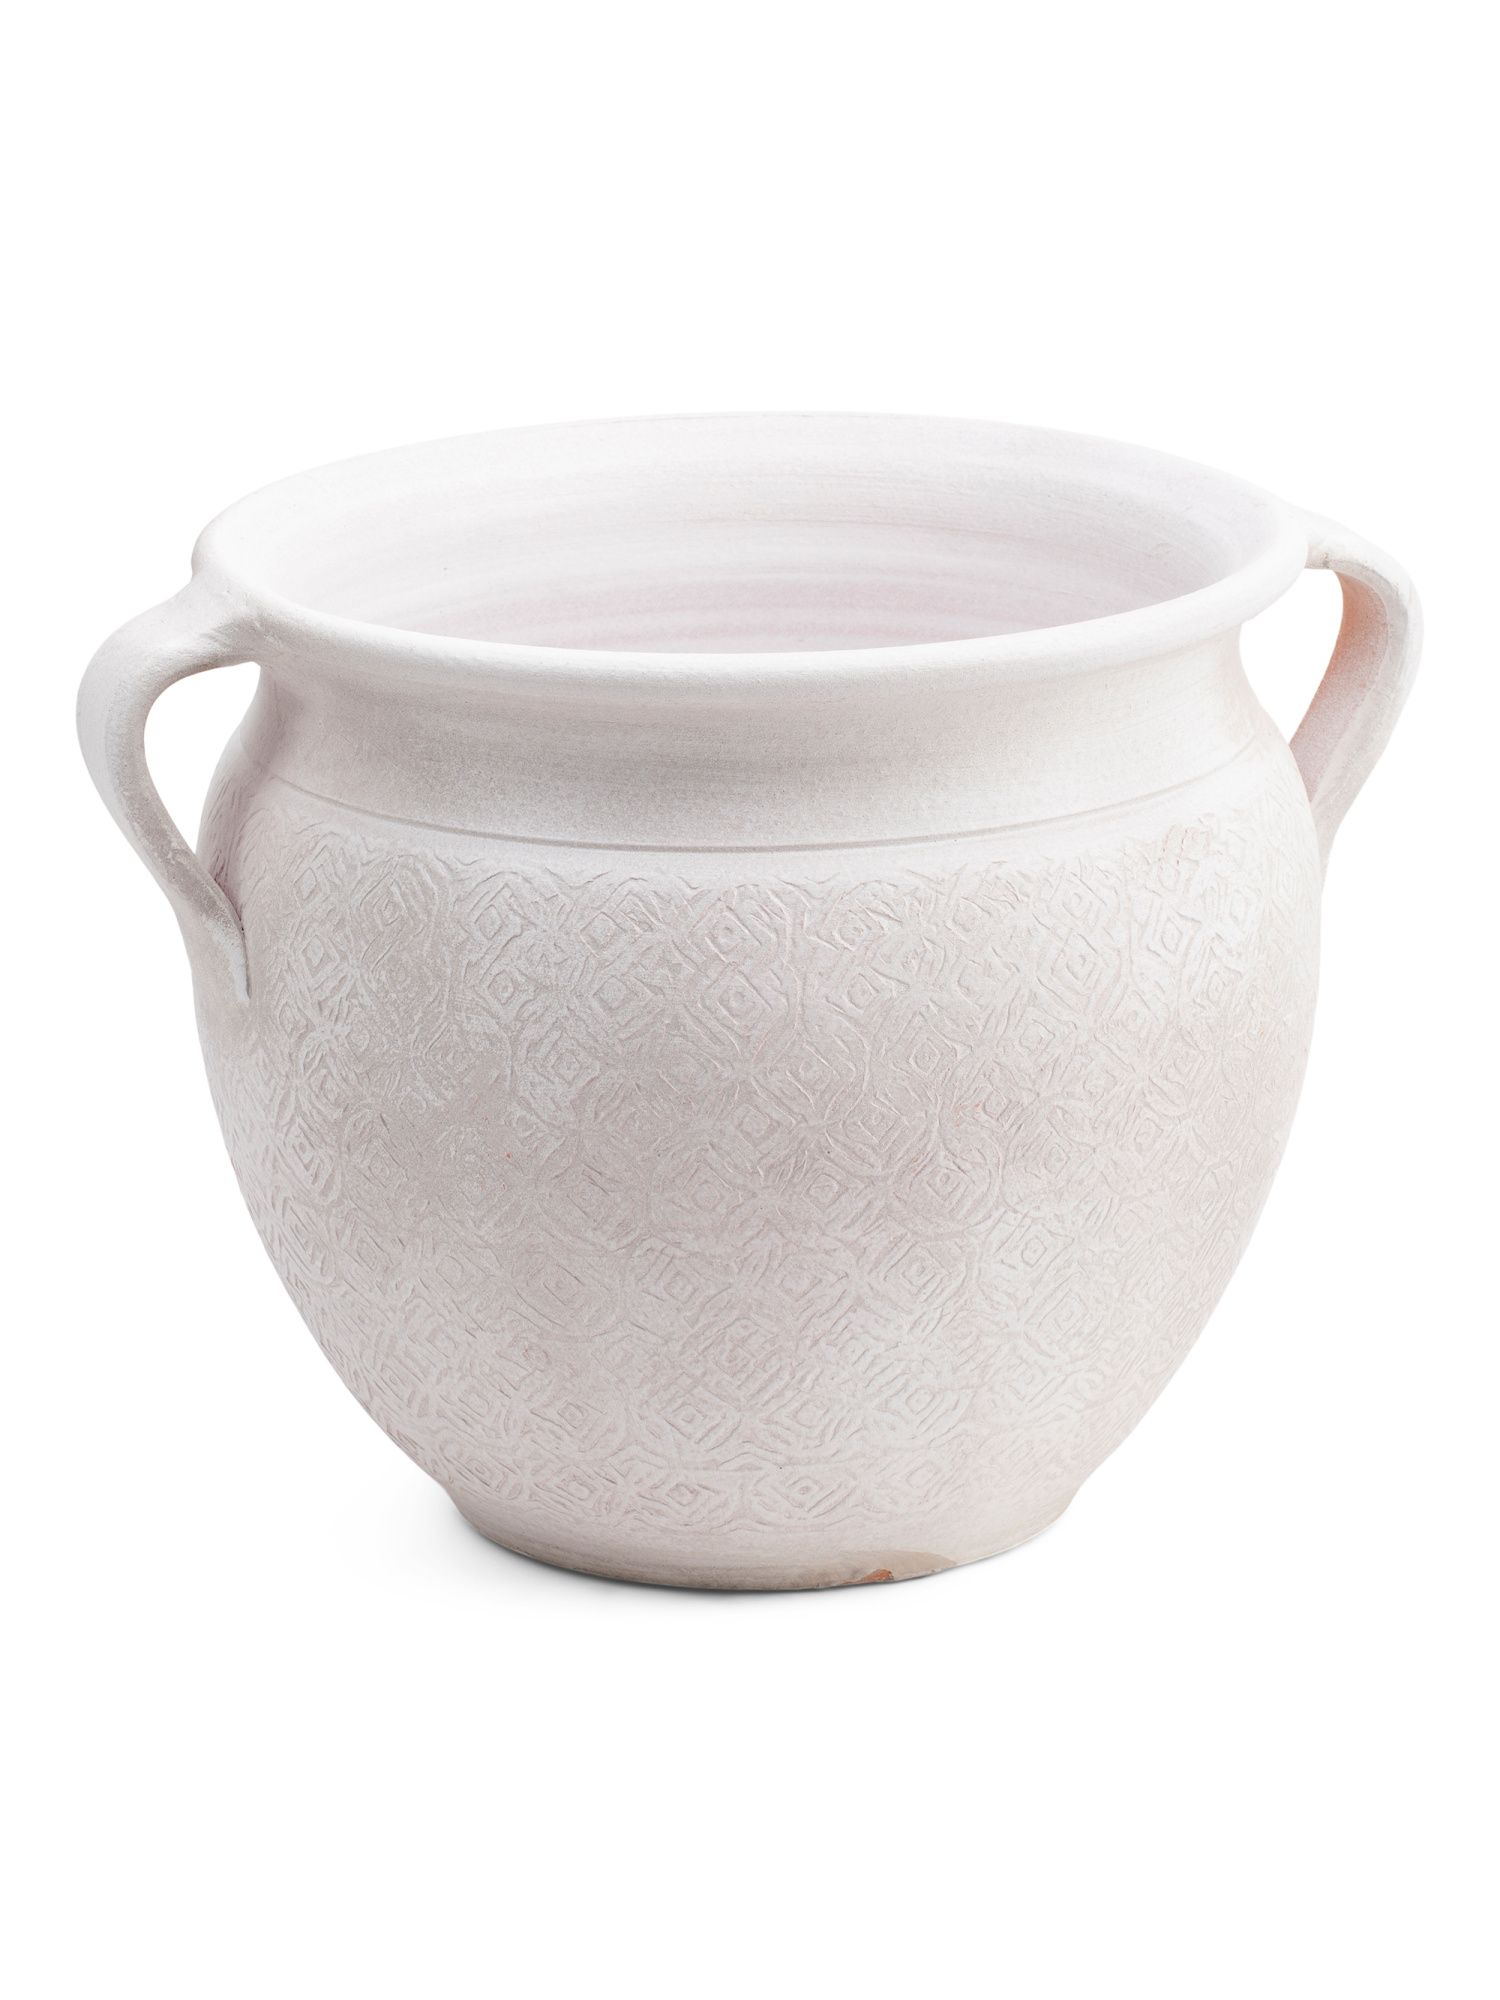 12.5in Ceramic Planter With Handles | Mother's Day Gifts | Marshalls | Marshalls